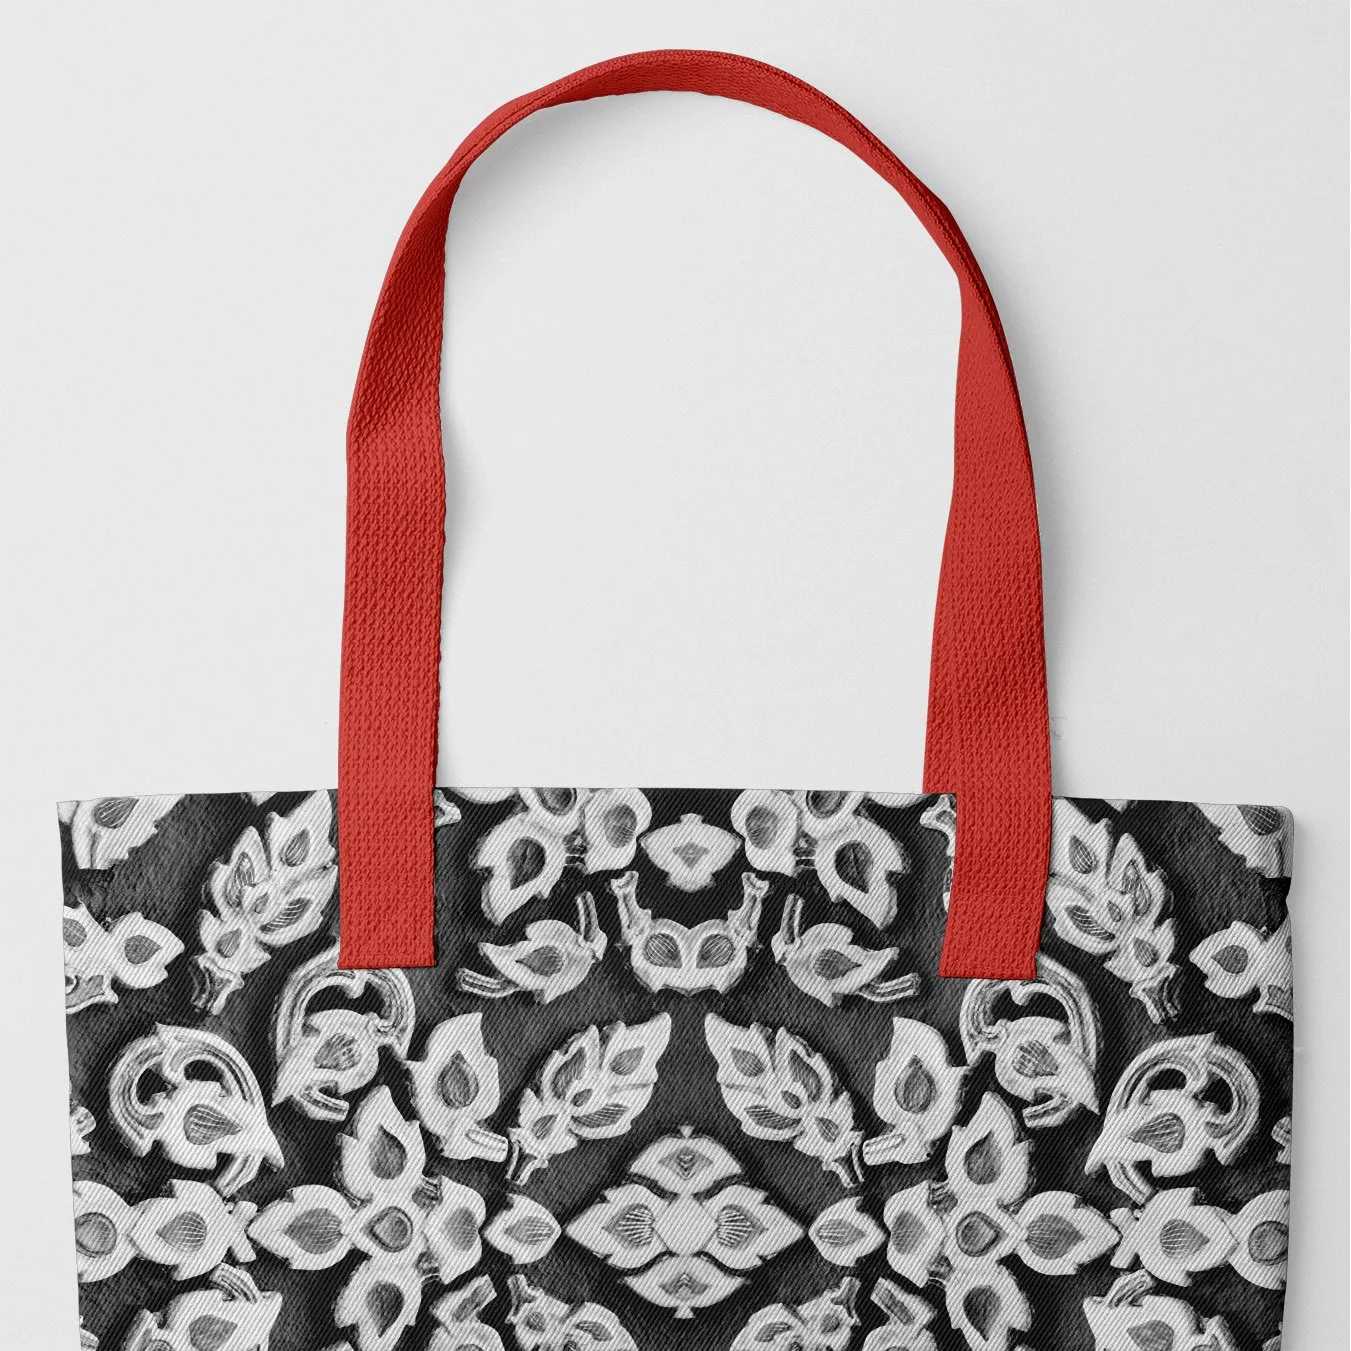 Ayodhya Tote - Black And White - Heavy Duty Reusable Grocery Bag - Red Handles - Shopping Totes - Aesthetic Art